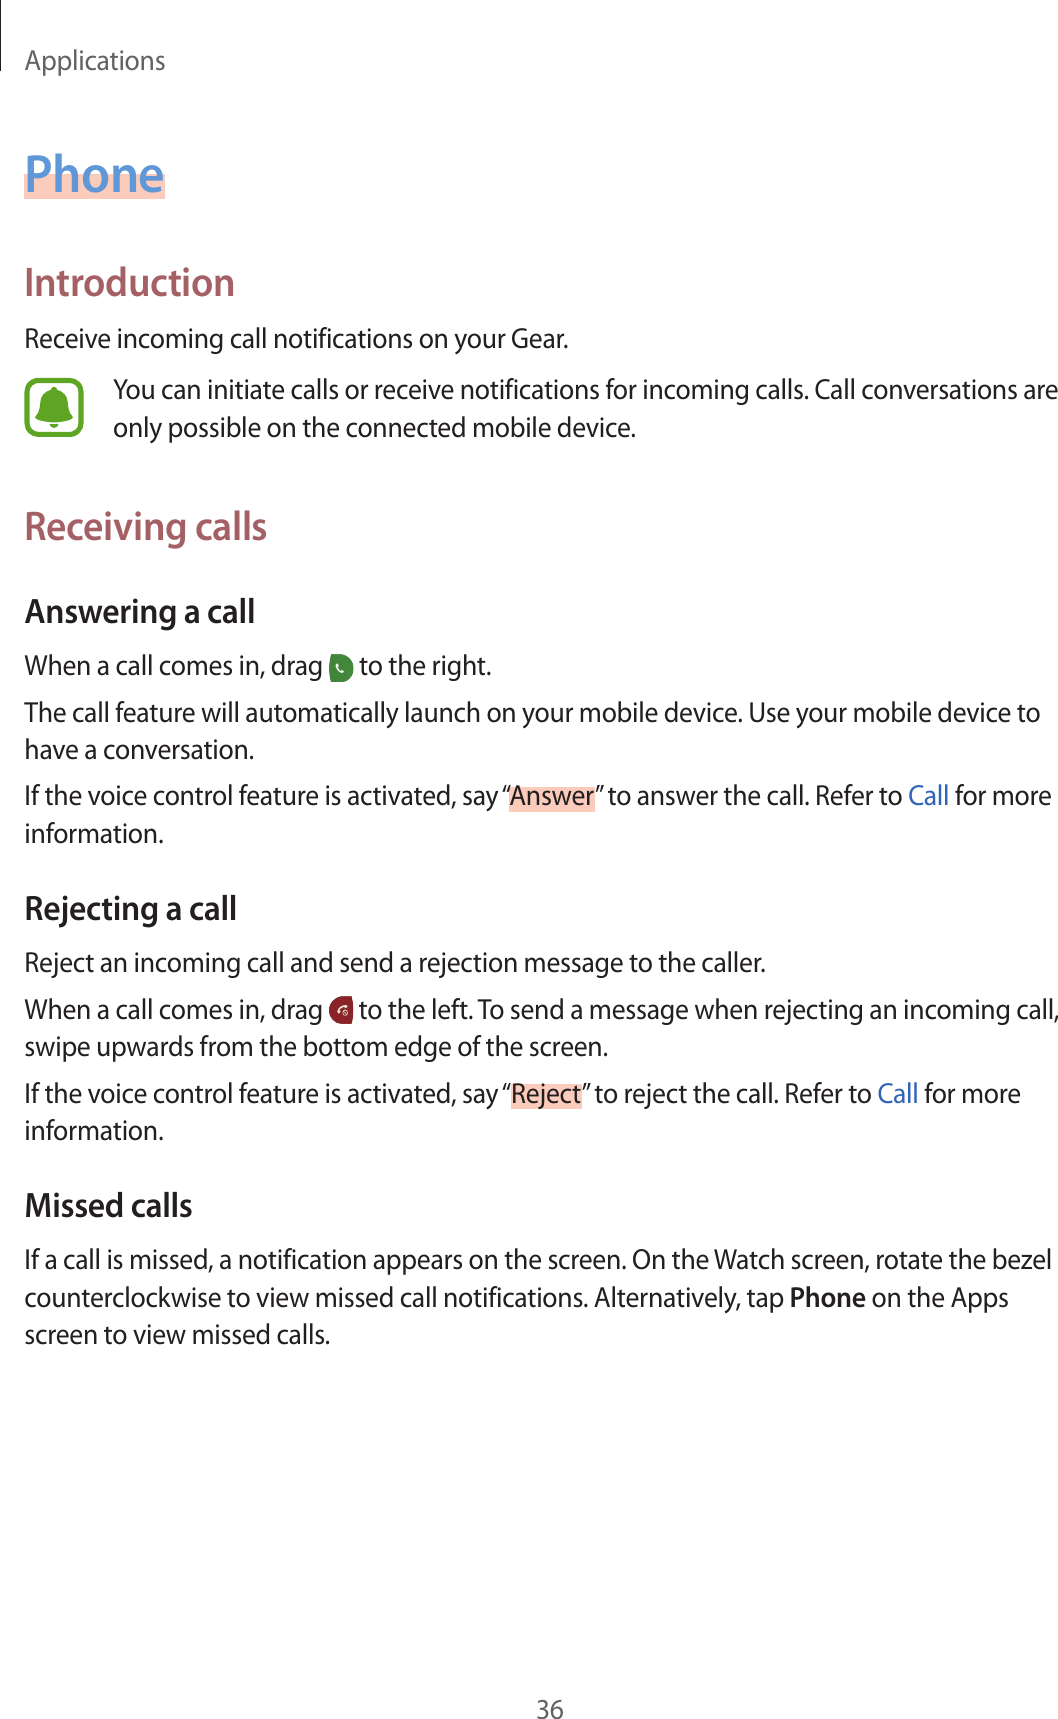 Applications36PhoneIntroductionReceive incoming call notifications on your Gear.You can initiate calls or receive notifications for incoming calls. Call conversations are only possible on the connected mobile device.Receiving callsAnswering a callWhen a call comes in, drag   to the right.The call feature will automatically launch on your mobile device. Use your mobile device to have a conversation.If the voice control feature is activated, say “Answer” to answer the call. Refer to Call for more information.Rejecting a callReject an incoming call and send a rejection message to the caller.When a call comes in, drag   to the left. To send a message when rejecting an incoming call, swipe upwards from the bottom edge of the screen.If the voice control feature is activated, say “Reject” to reject the call. Refer to Call for more information.Missed callsIf a call is missed, a notification appears on the screen. On the Watch screen, rotate the bezel counterclockwise to view missed call notifications. Alternatively, tap Phone on the Apps screen to view missed calls.